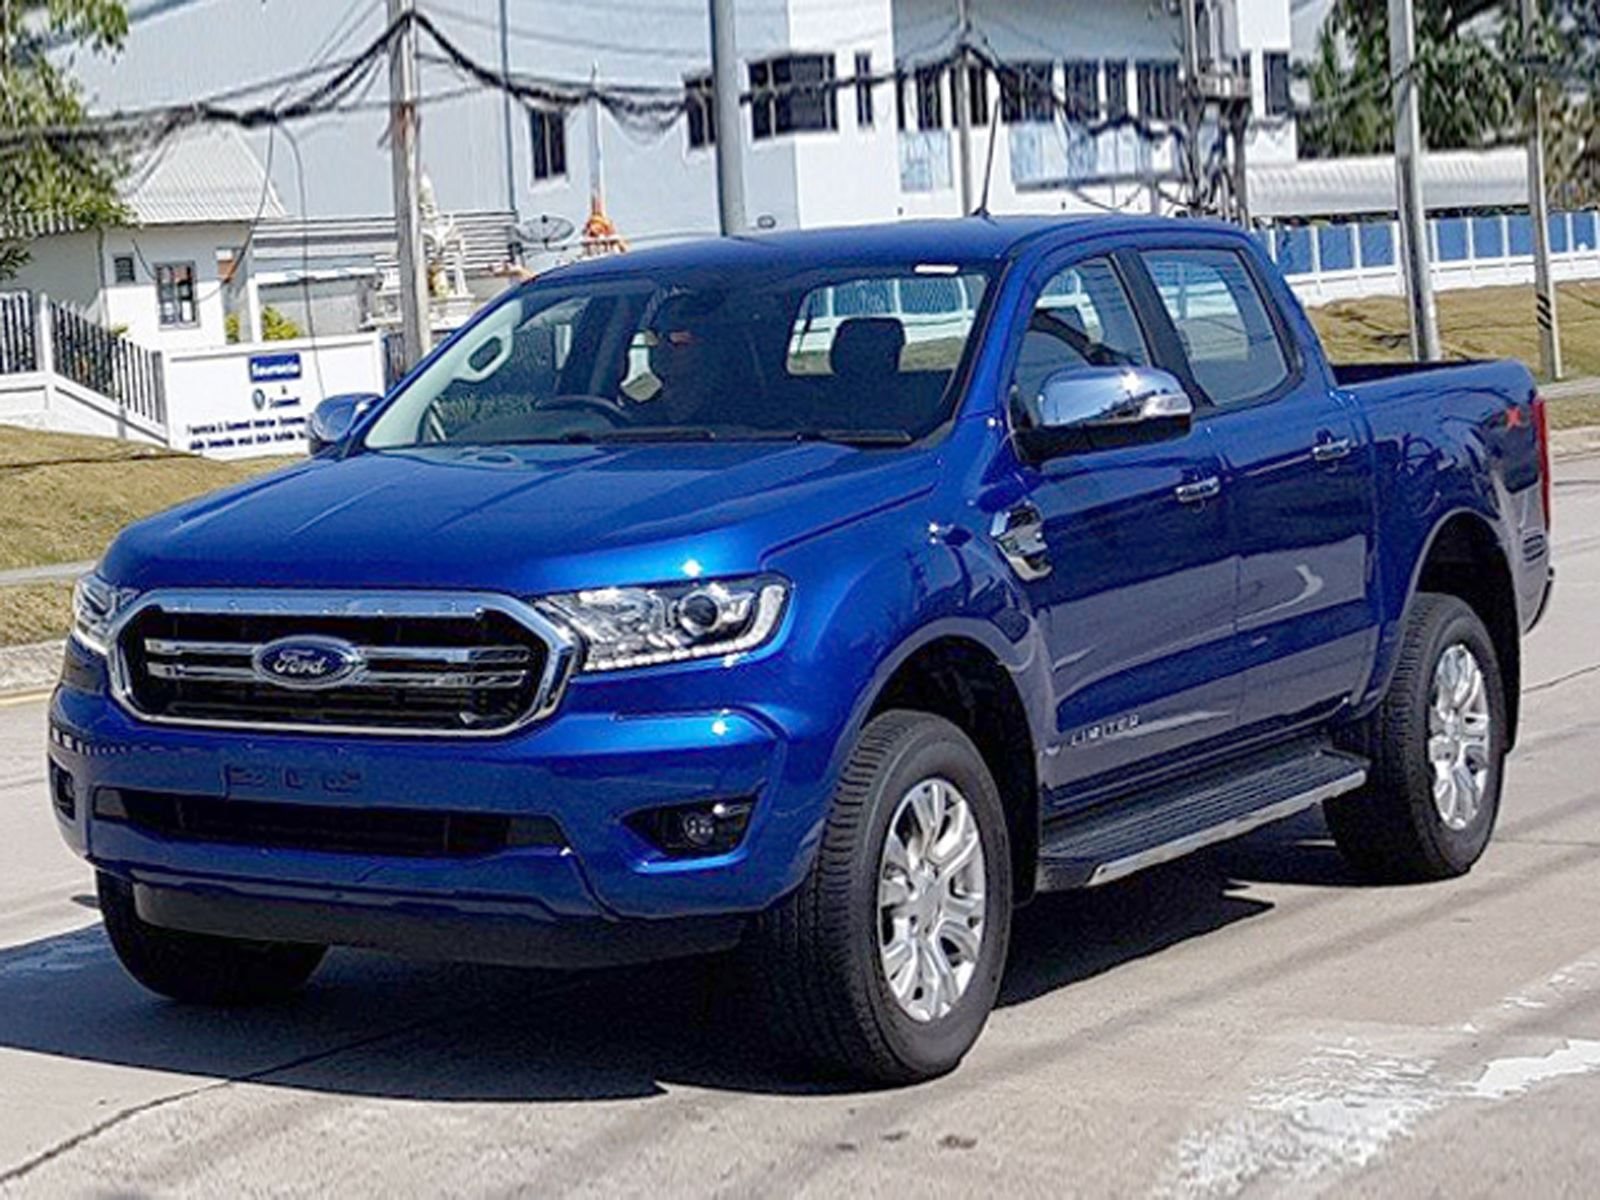 America's New Ford Ranger Will Probably Look A Lot Like This | CarBuzz